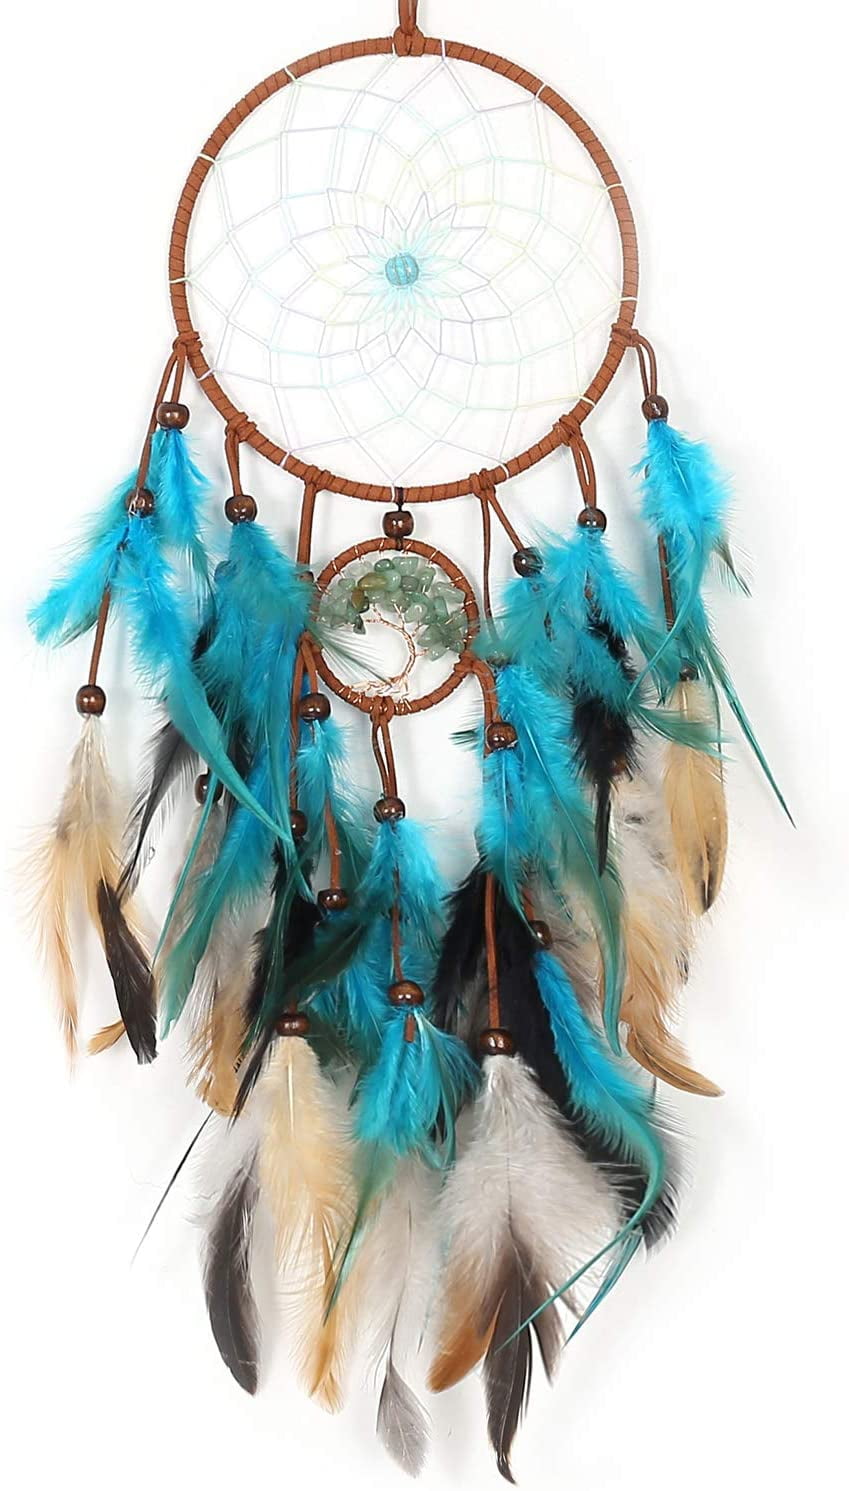 30" New Large Handmade Orange Dream Catcher With Feather Home Decor Wall Hanging 